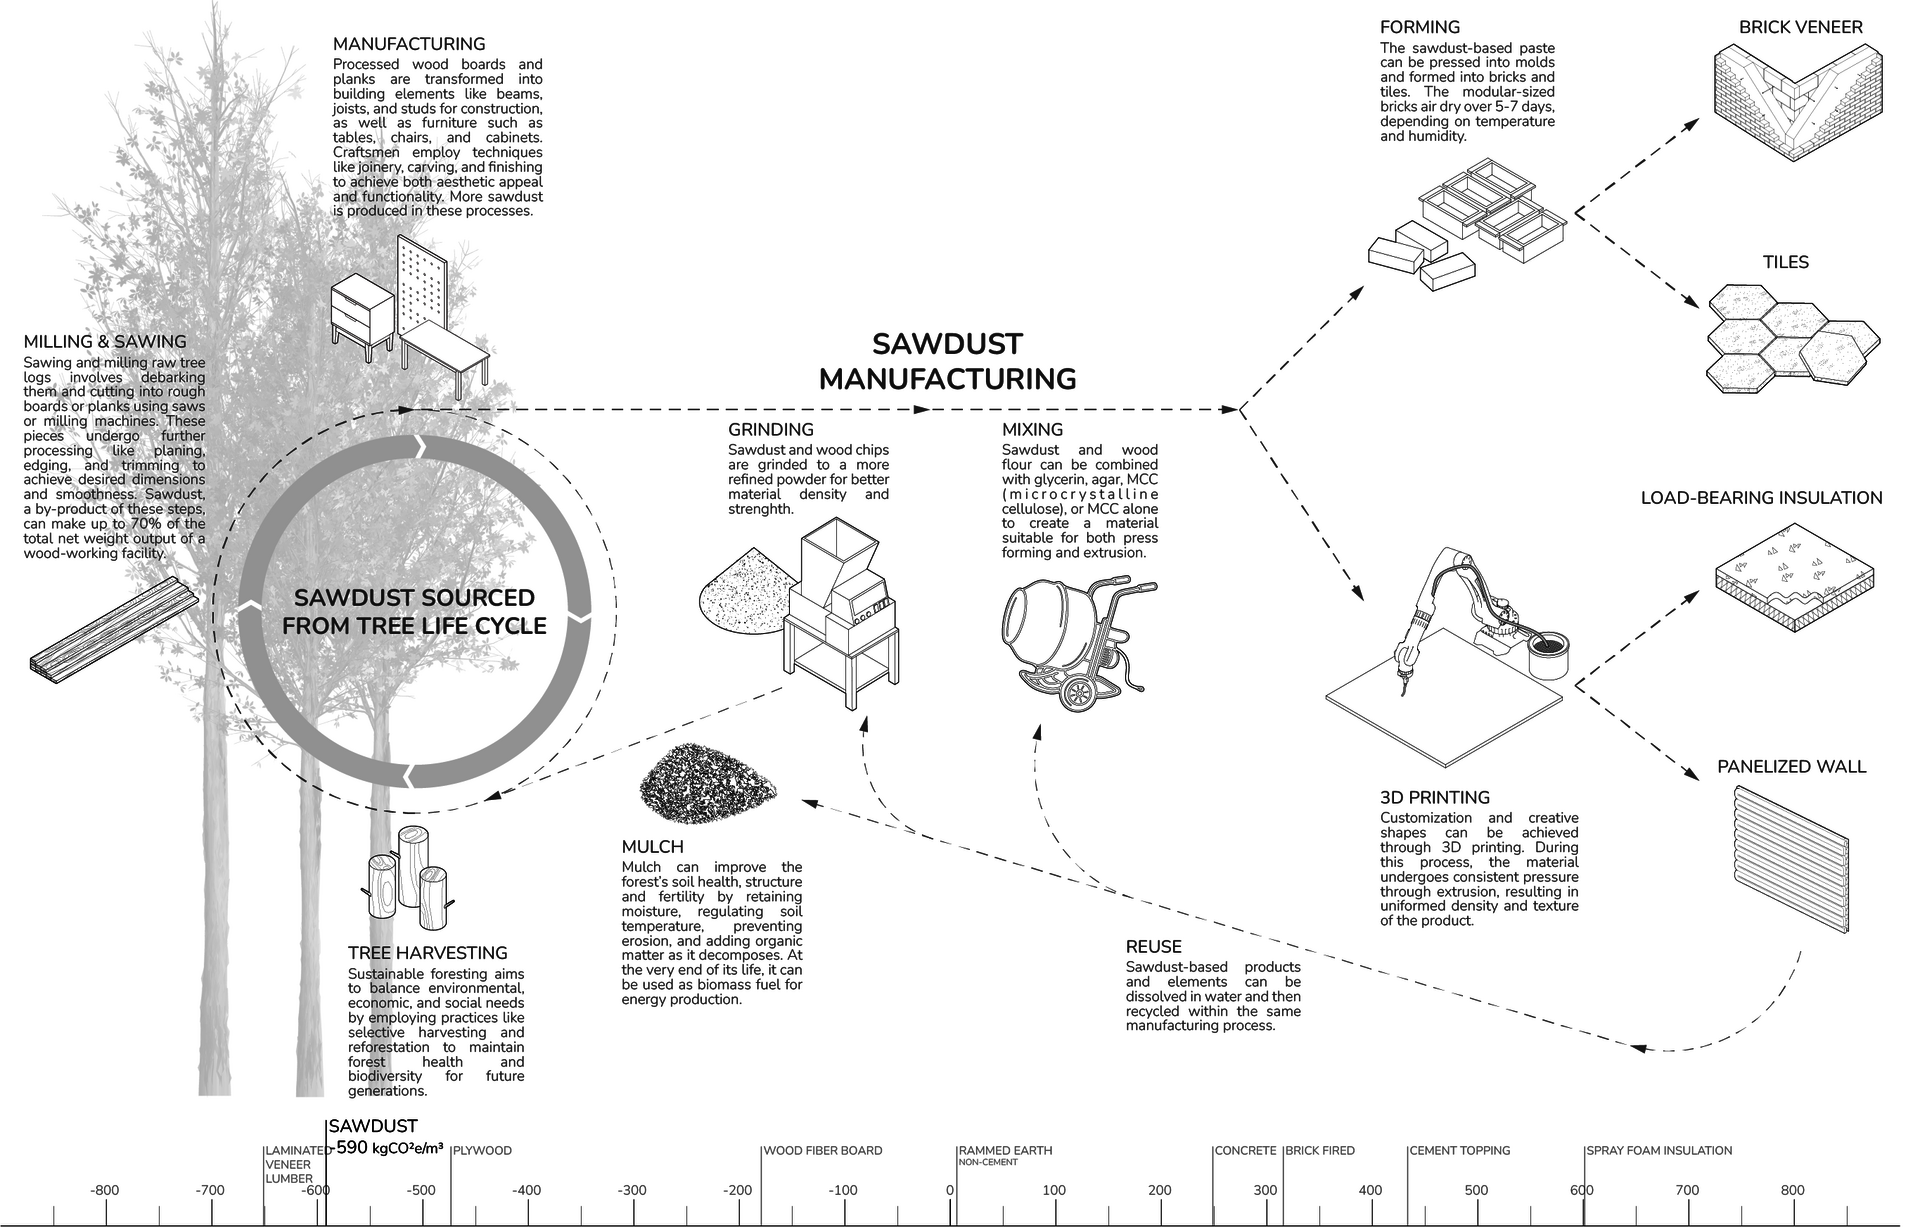 The life cycle diagram outlines sourcing sawdust from the natural wood cycle, its manufacturing process (grinding and mixing), its potential architectural applications, including block forming and 3D printing, and finally the reuse and end-of-life options. 